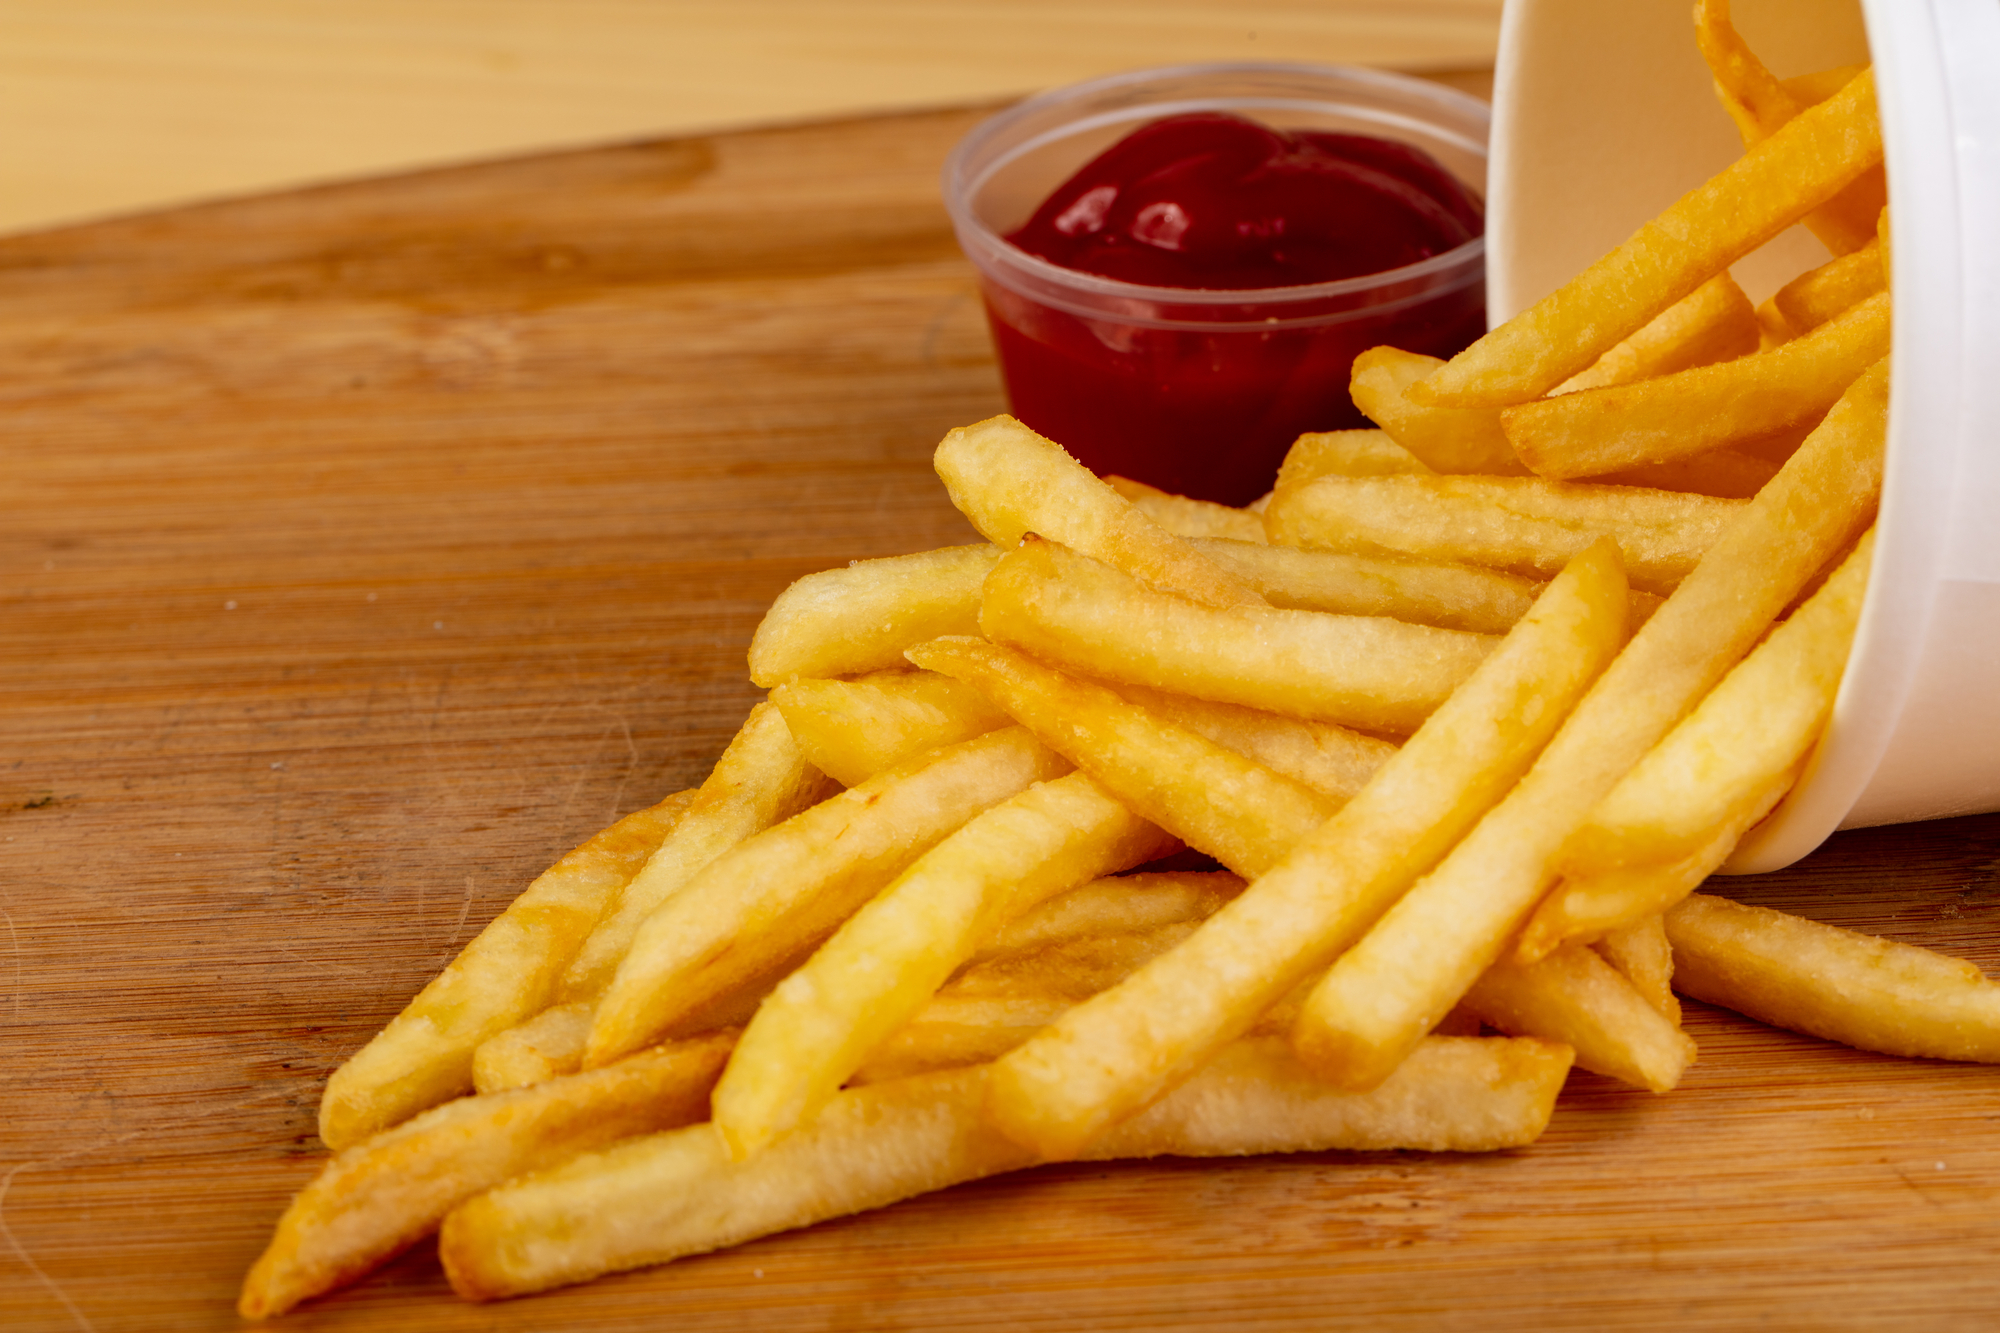 Our french fry supply is safe for now, but the future is uncertain